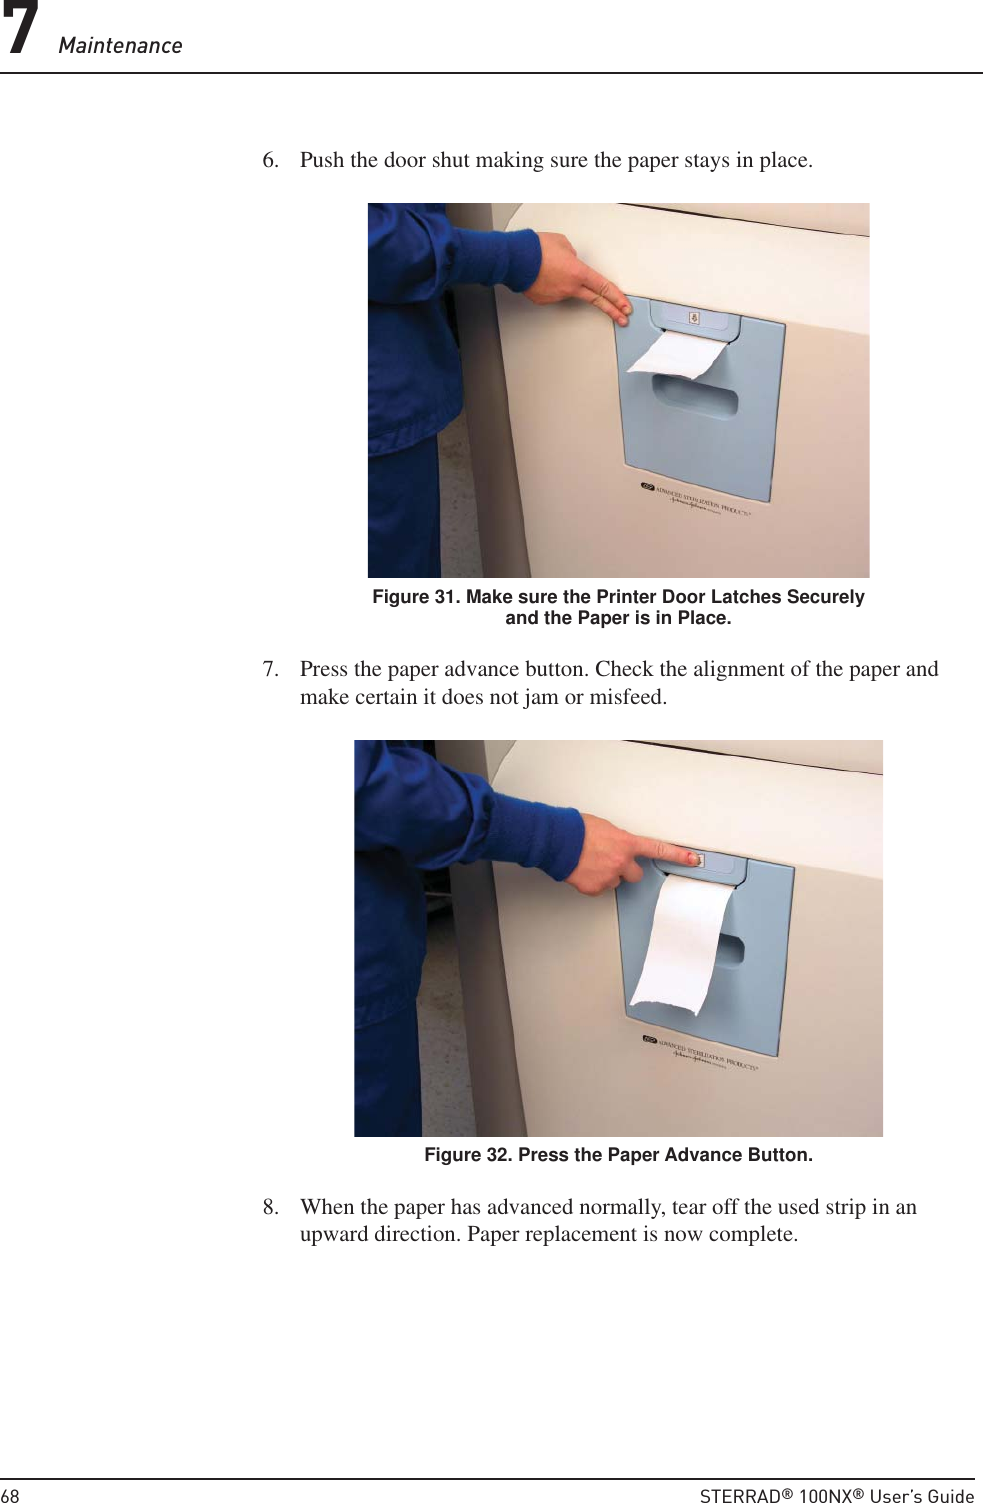 7 Maintenance68  STERRAD® 100NX® User’s Guide6.  Push the door shut making sure the paper stays in place.Figure 31. Make sure the Printer Door Latches Securely and the Paper is in Place.7.  Press the paper advance button. Check the alignment of the paper and make certain it does not jam or misfeed.Figure 32. Press the Paper Advance Button.8.  When the paper has advanced normally, tear off the used strip in an upward direction. Paper replacement is now complete.